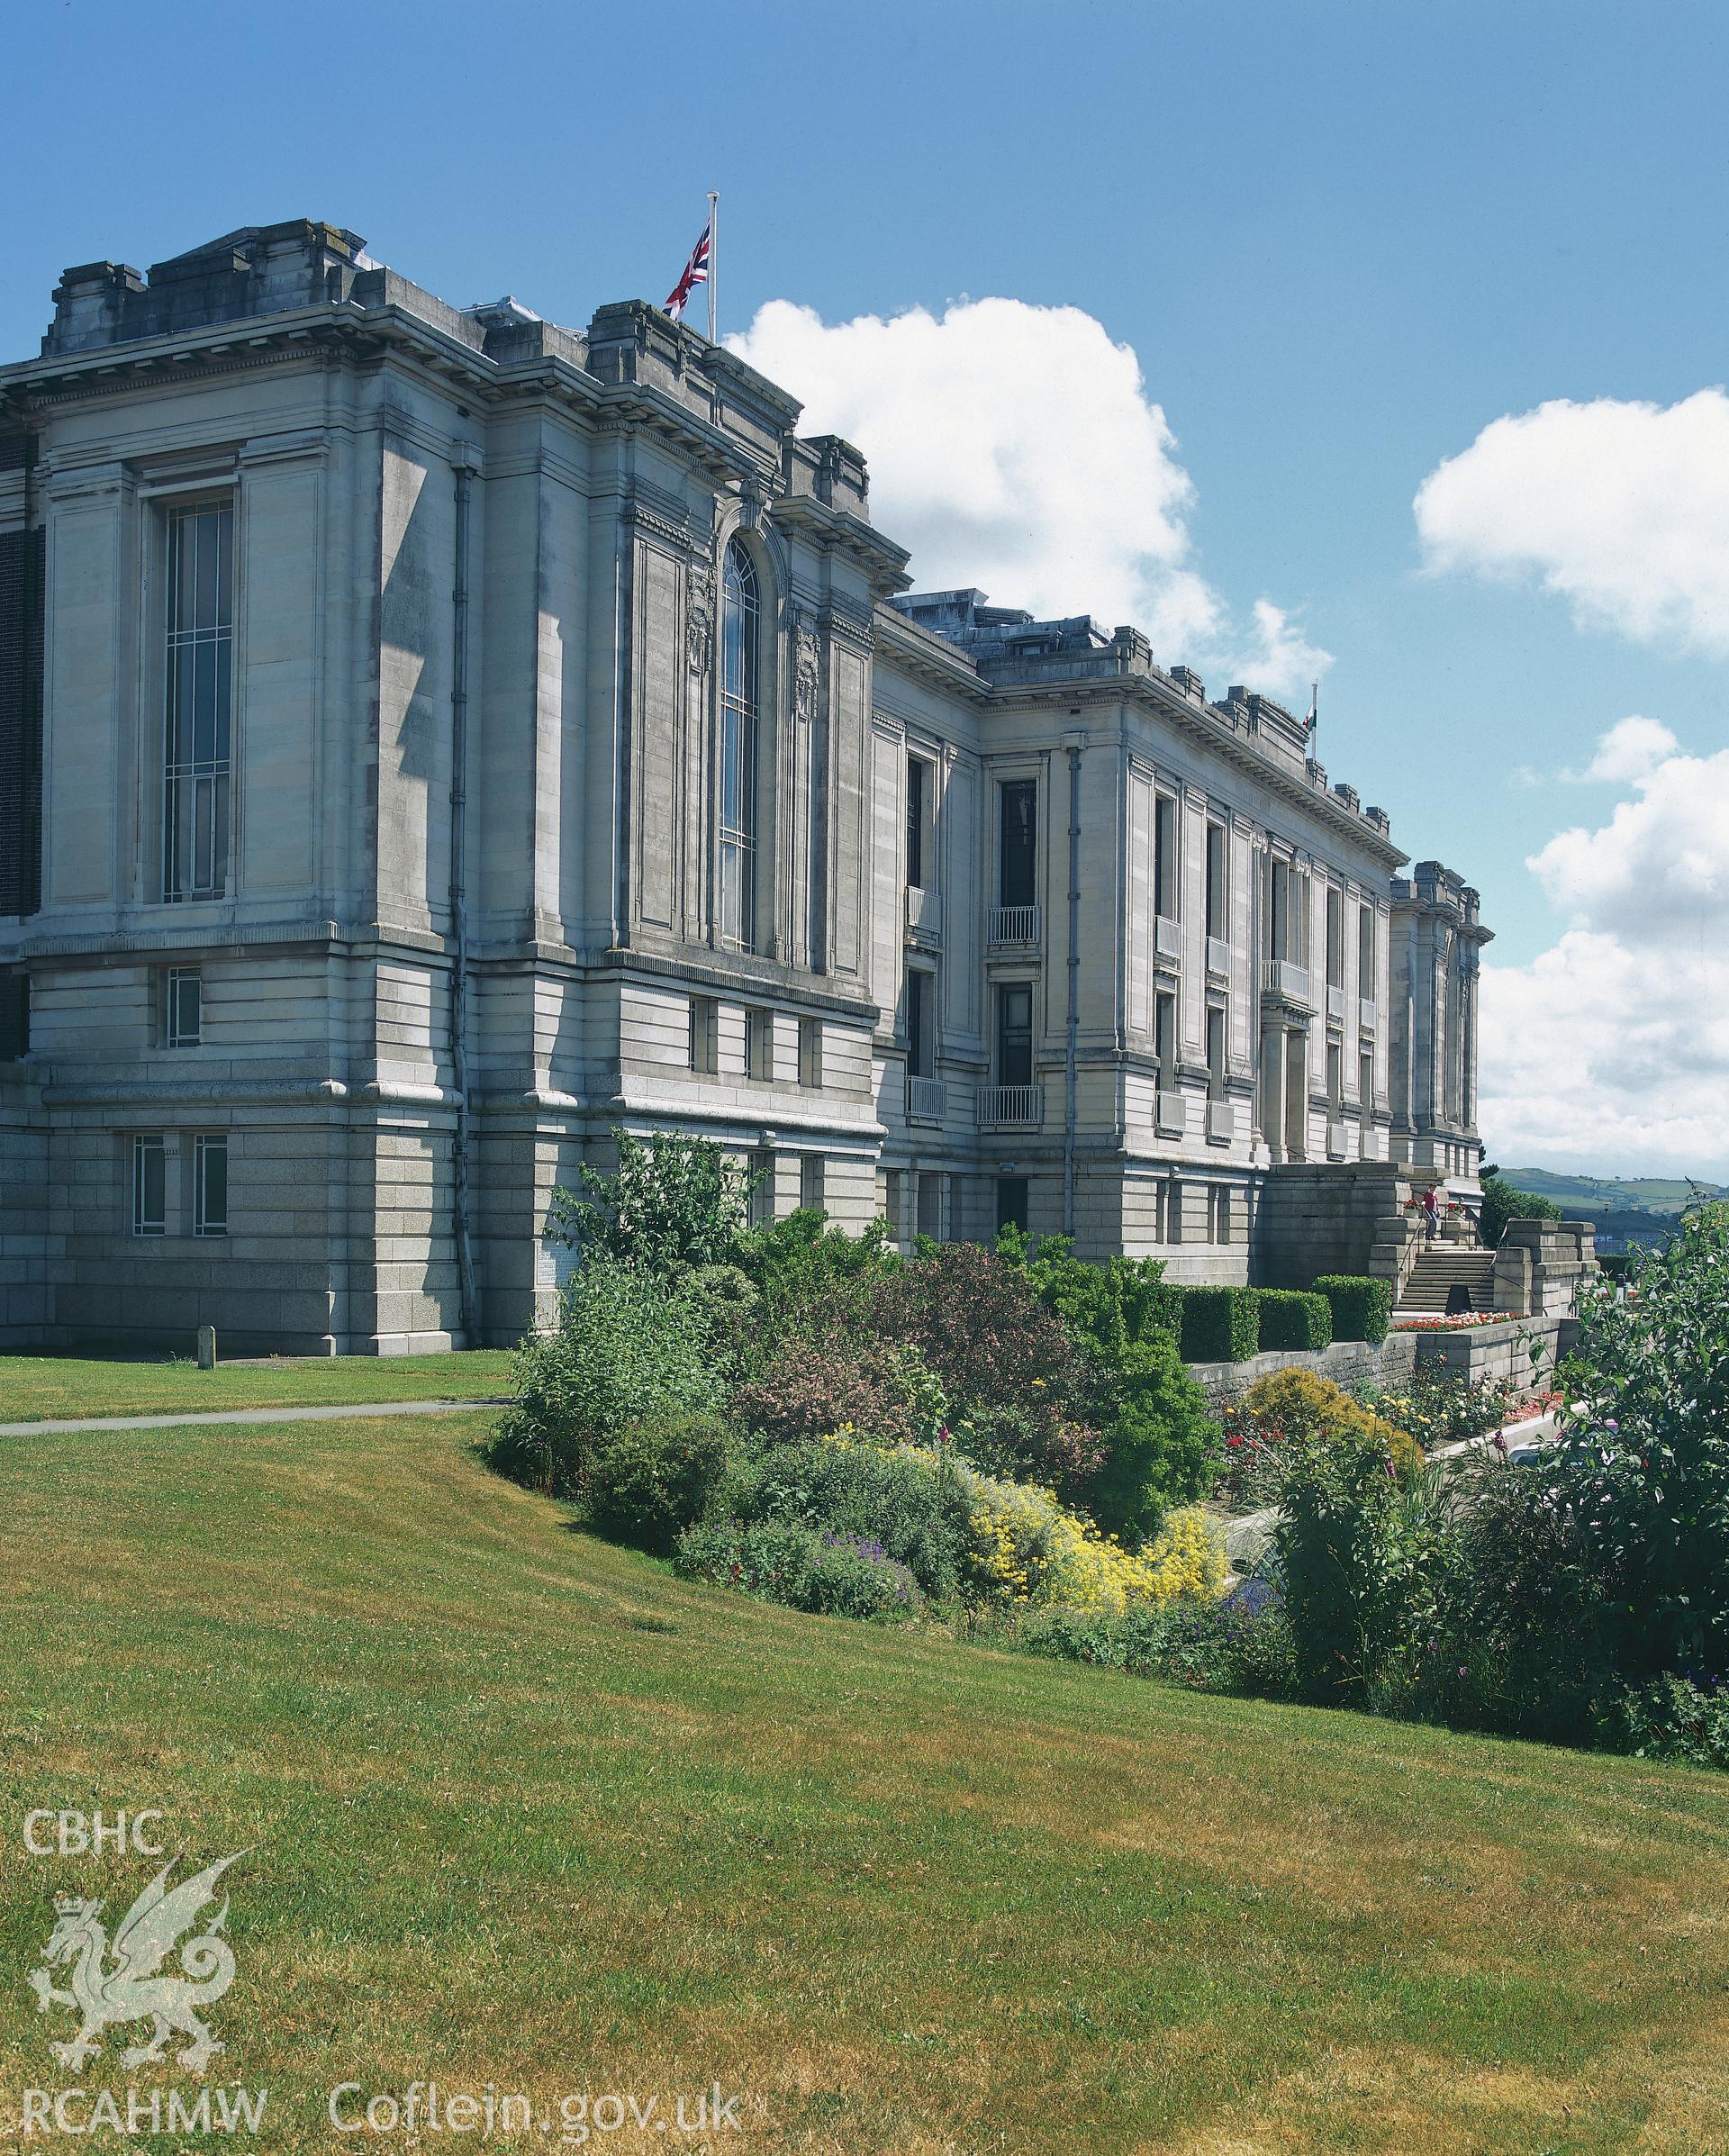 RCAHMW colour transparency showing exterior view of National Library of Wales, Aberystwyth